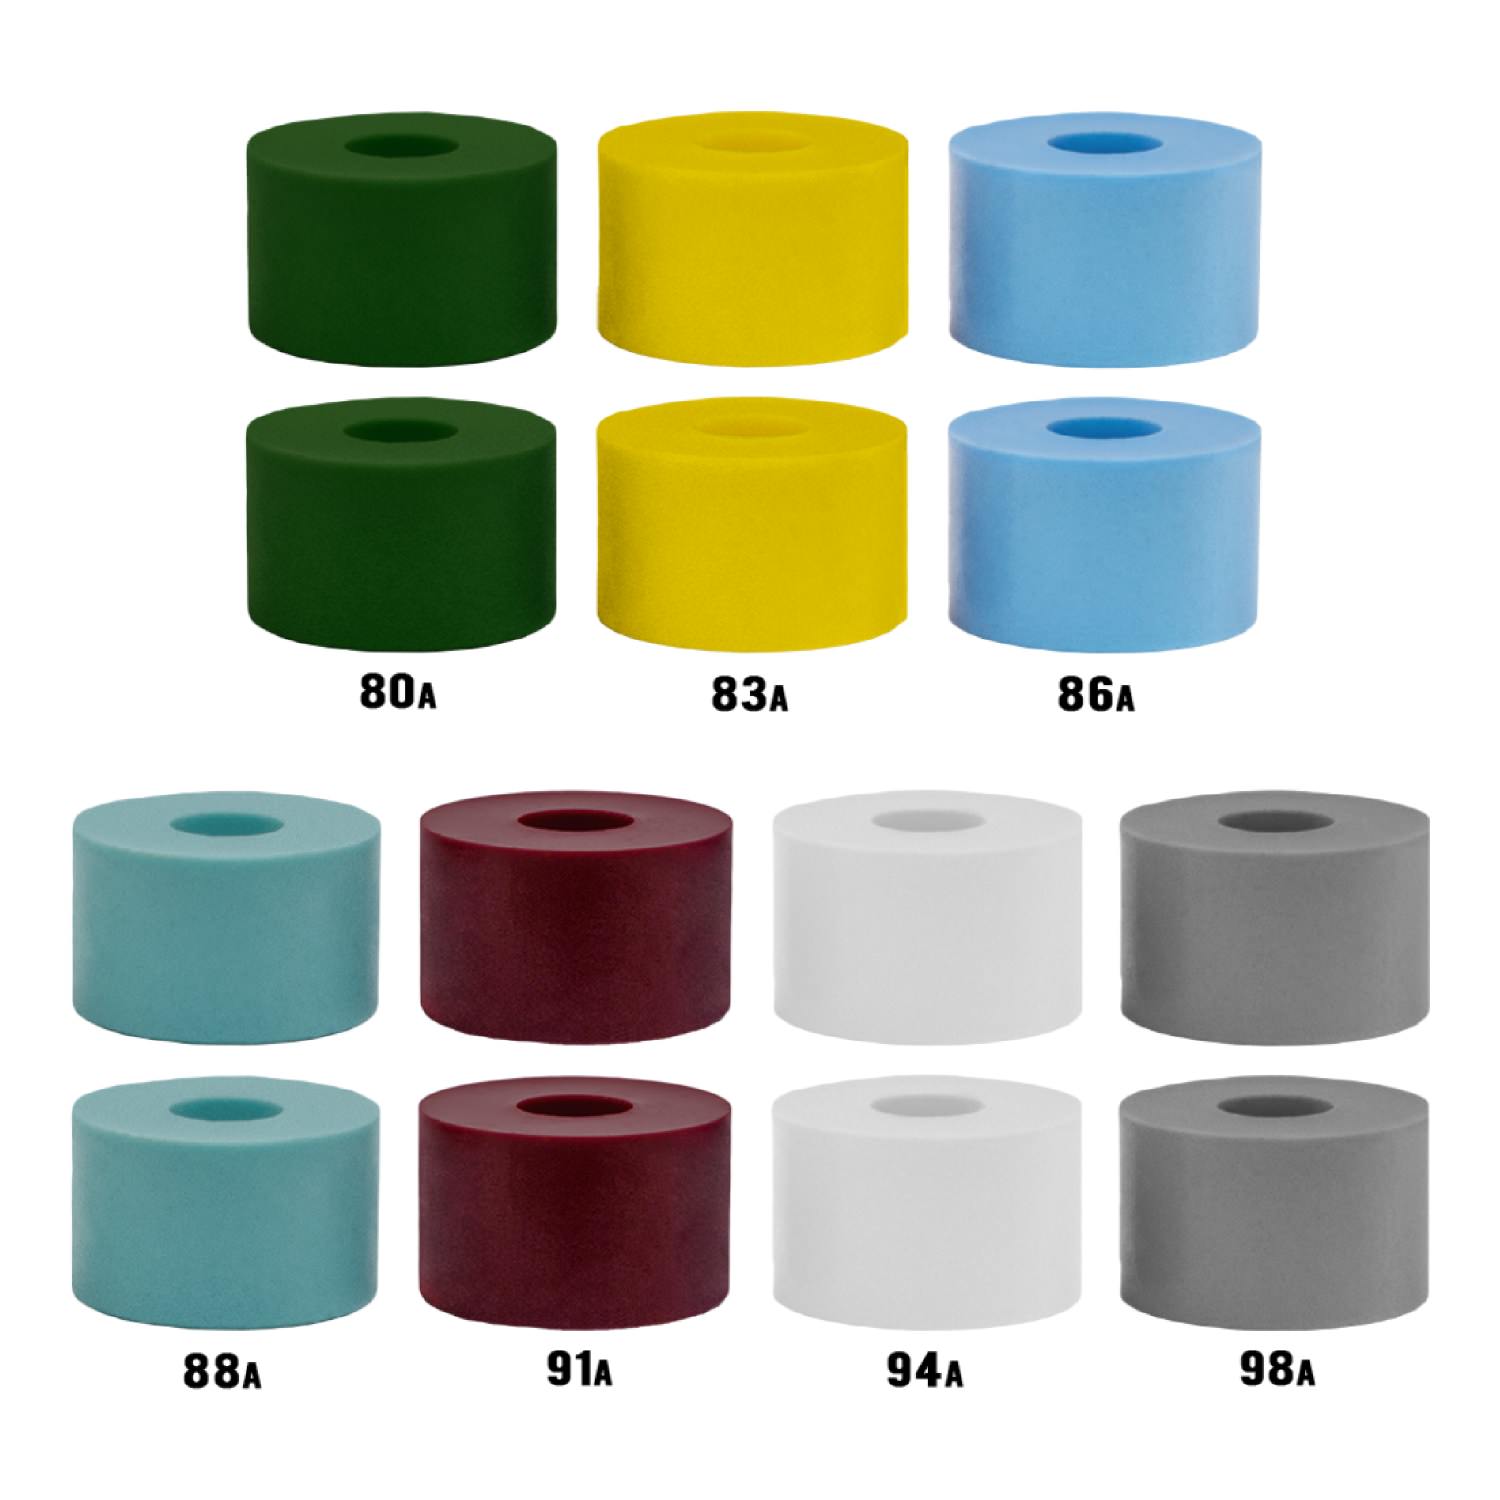 Venom Bushings (All Shapes and Durometers)